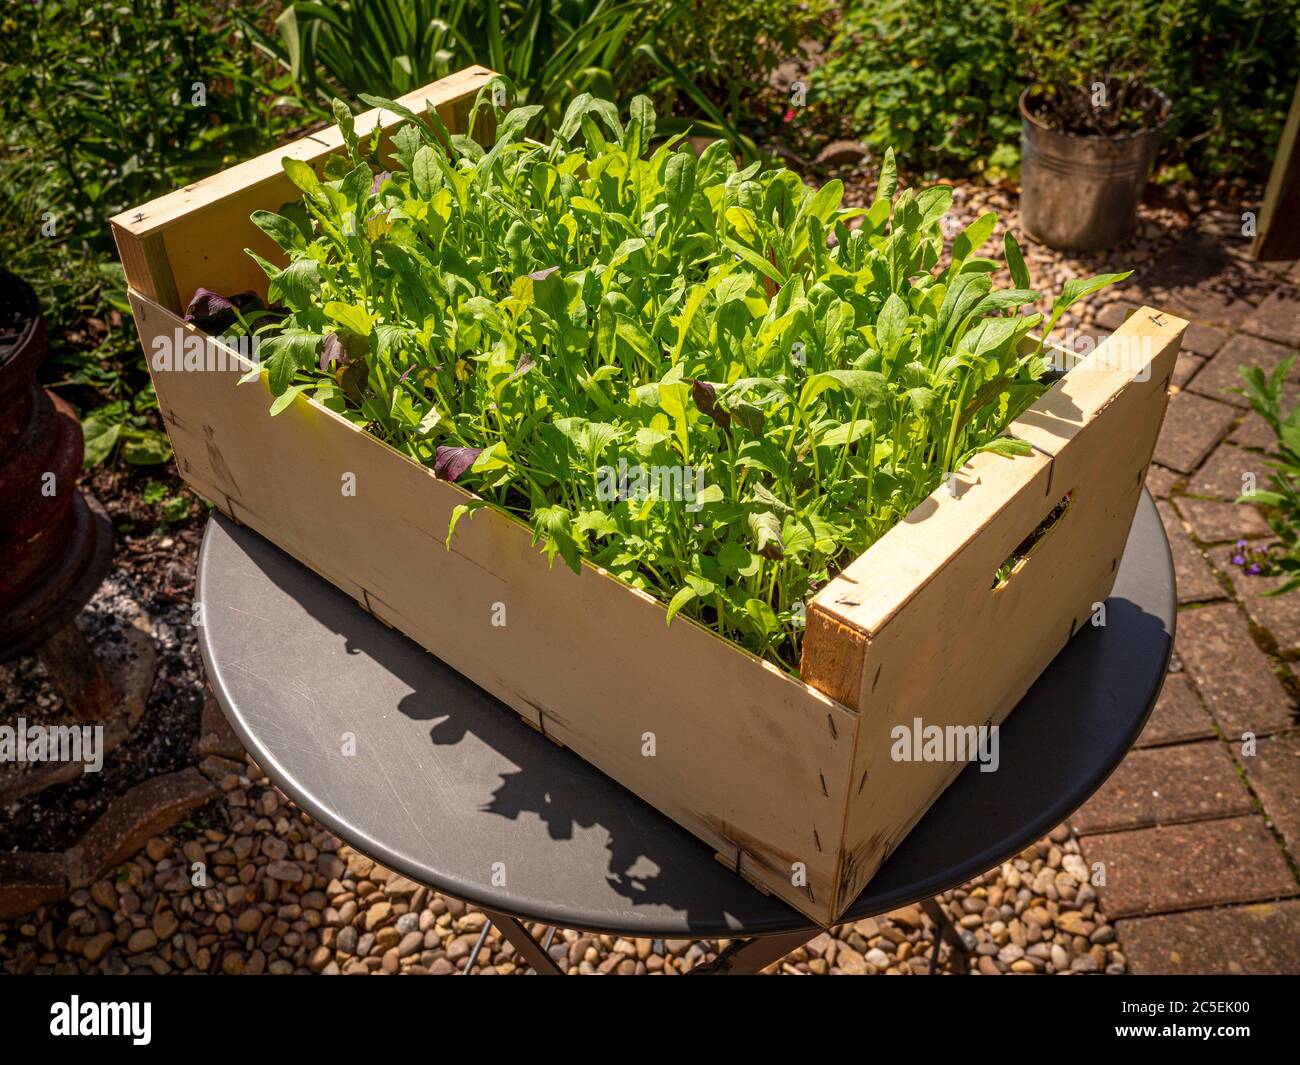 Mixed salad leaves growing in a recycled wooden vegetable box, outside in a garden. Stock Photo